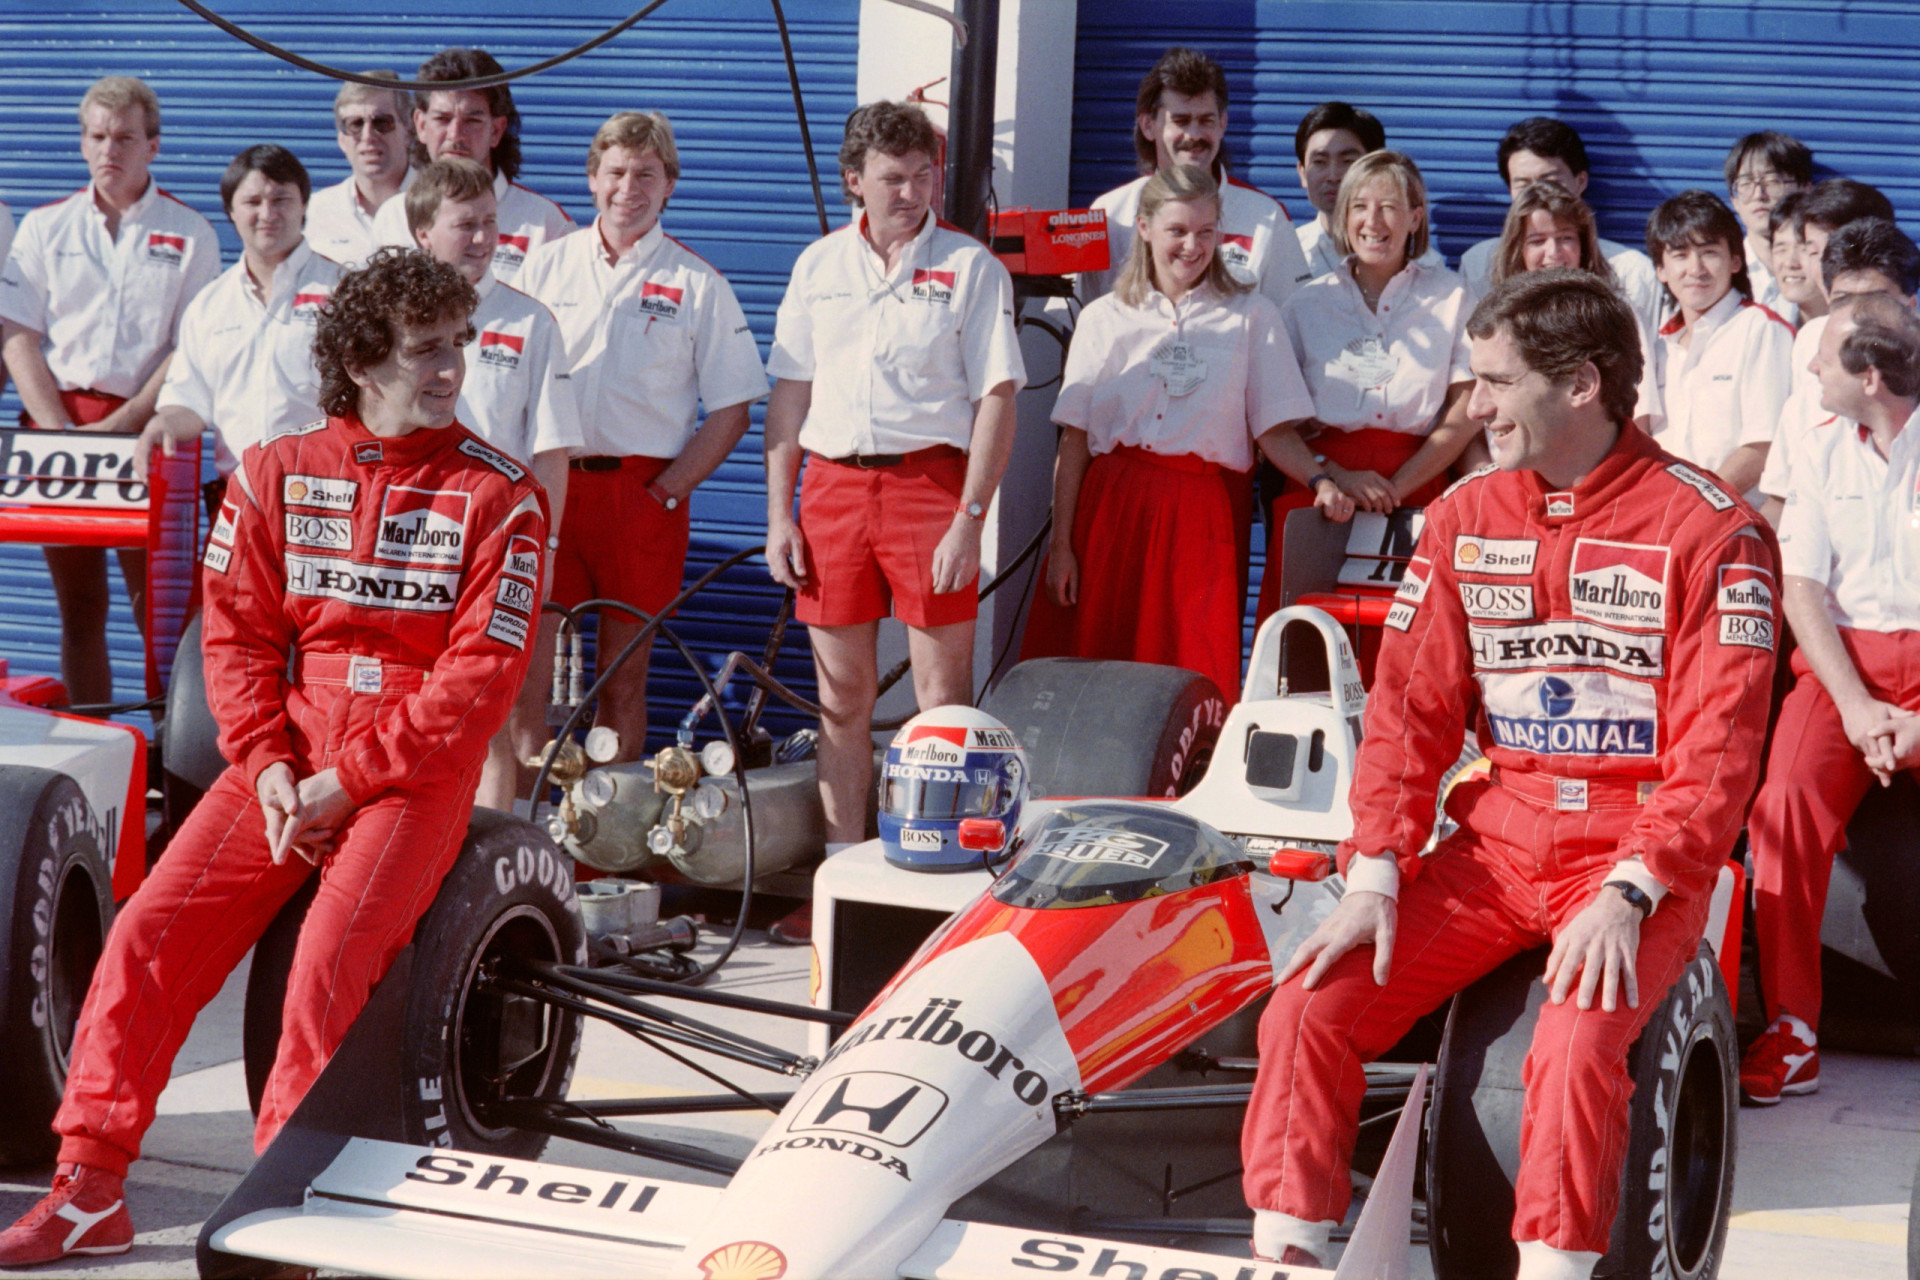 <p>Tensions between Senna and Prost boiled over on several occasions during the 1988 season. But the experienced pair realized that, despite their personal rivalry, they had to work together, especially in testing, to keep ahead of their main opposition from Ferrari, Williams, Benetton, and Lotus. Rarely looking over their shoulders at rivals, the pair claimed 15 wins out of 16.</p><p>You may also like:<a href="https://www.starsinsider.com/n/419077?utm_source=msn.com&utm_medium=display&utm_campaign=referral_description&utm_content=703485en-us"> The pros and cons of buying an electric car</a></p>